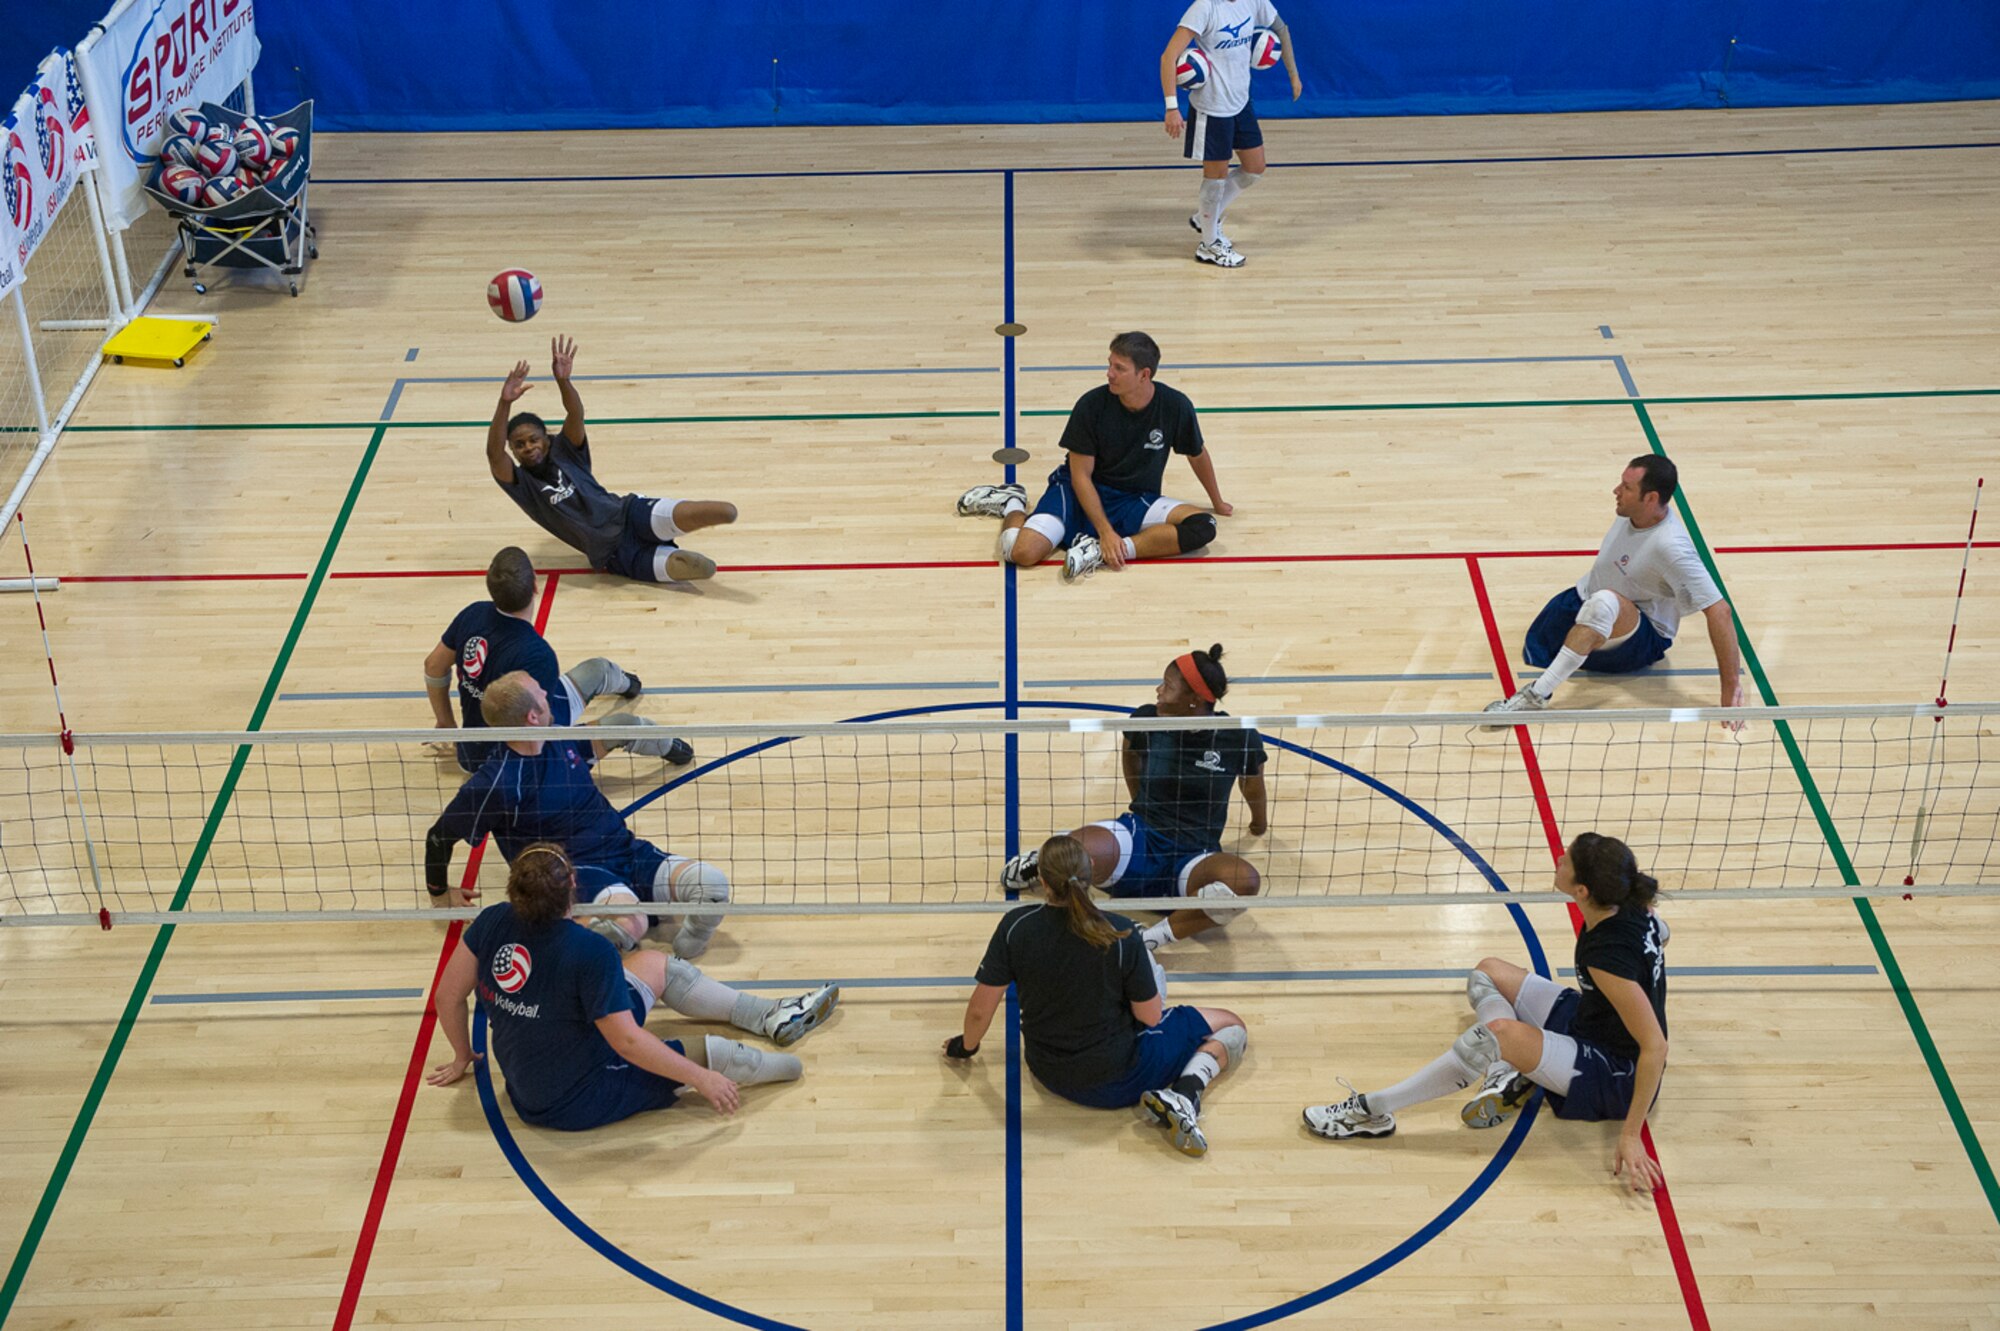 Playing a scrimmage against the male Paralympic team, Miller was named the best receiver and libero (defensive specialist) during the 2012 Paralympics in the women’s sitting volleyball event at the London Games. (Photo by Tech. Sgt. Samuel Bendet)